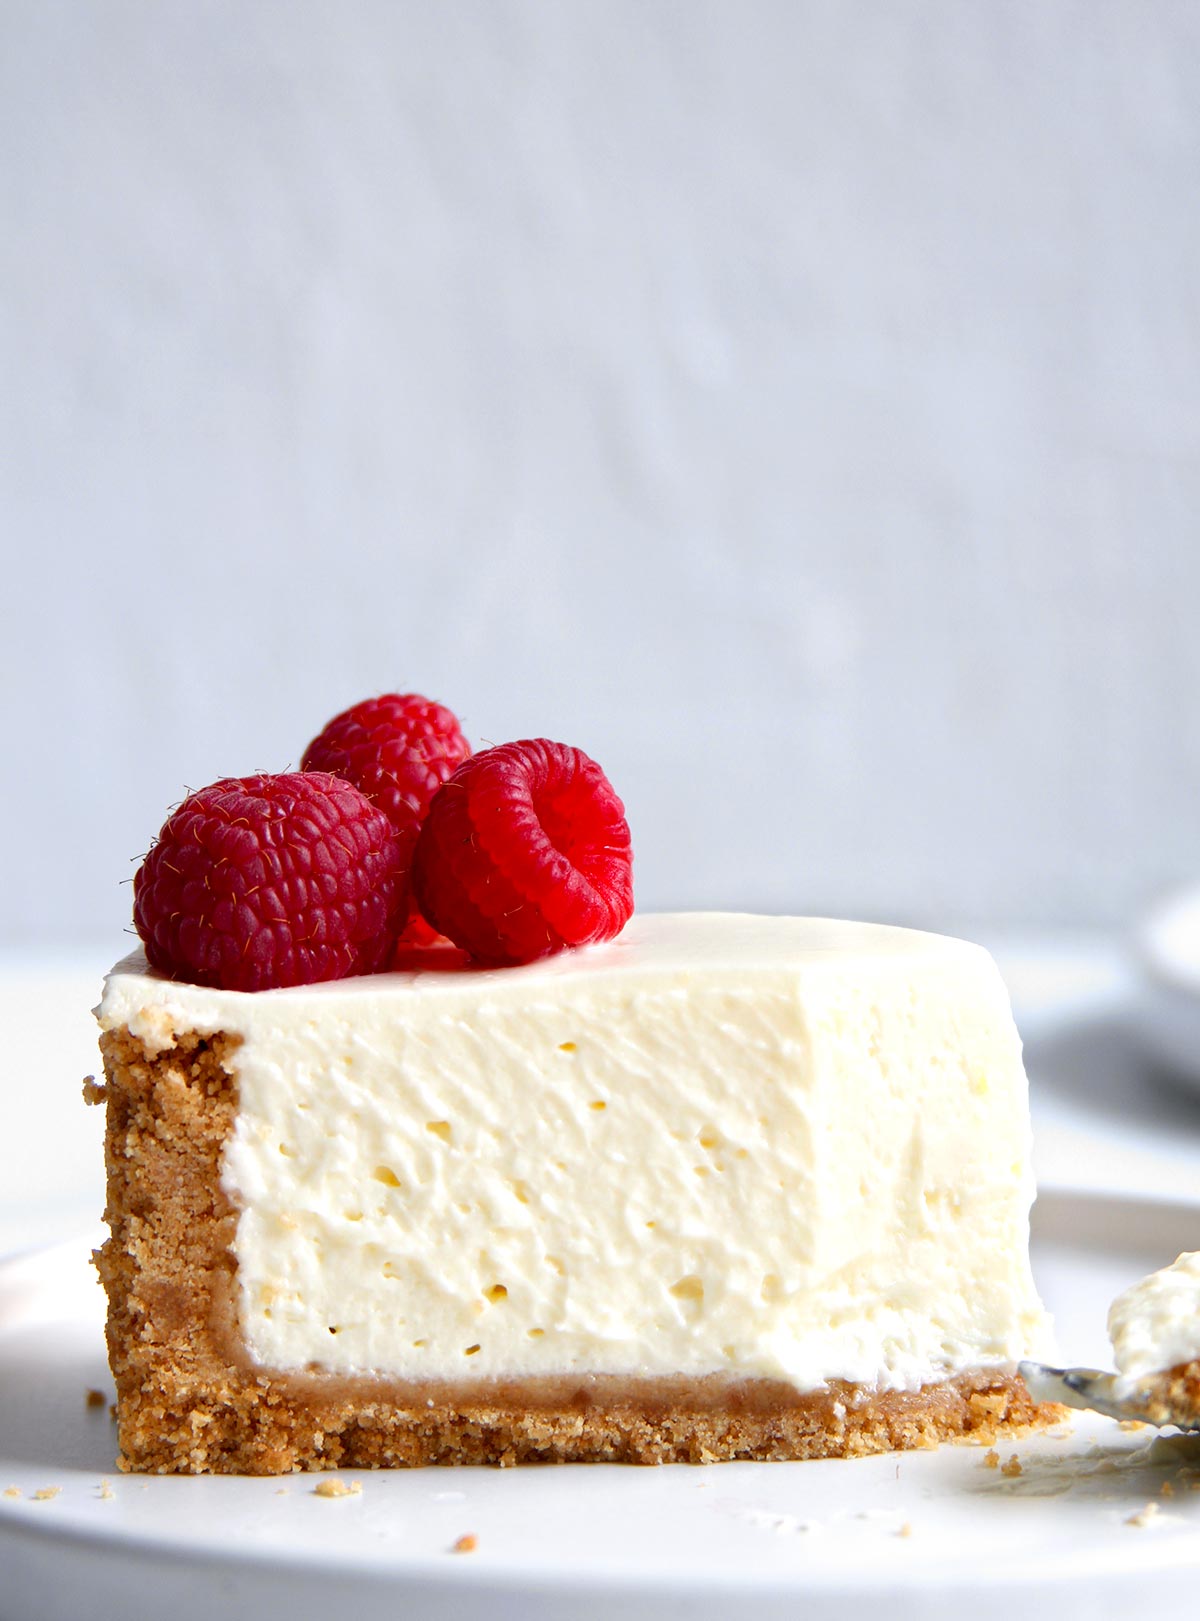 Slice of cheesecake with light filling